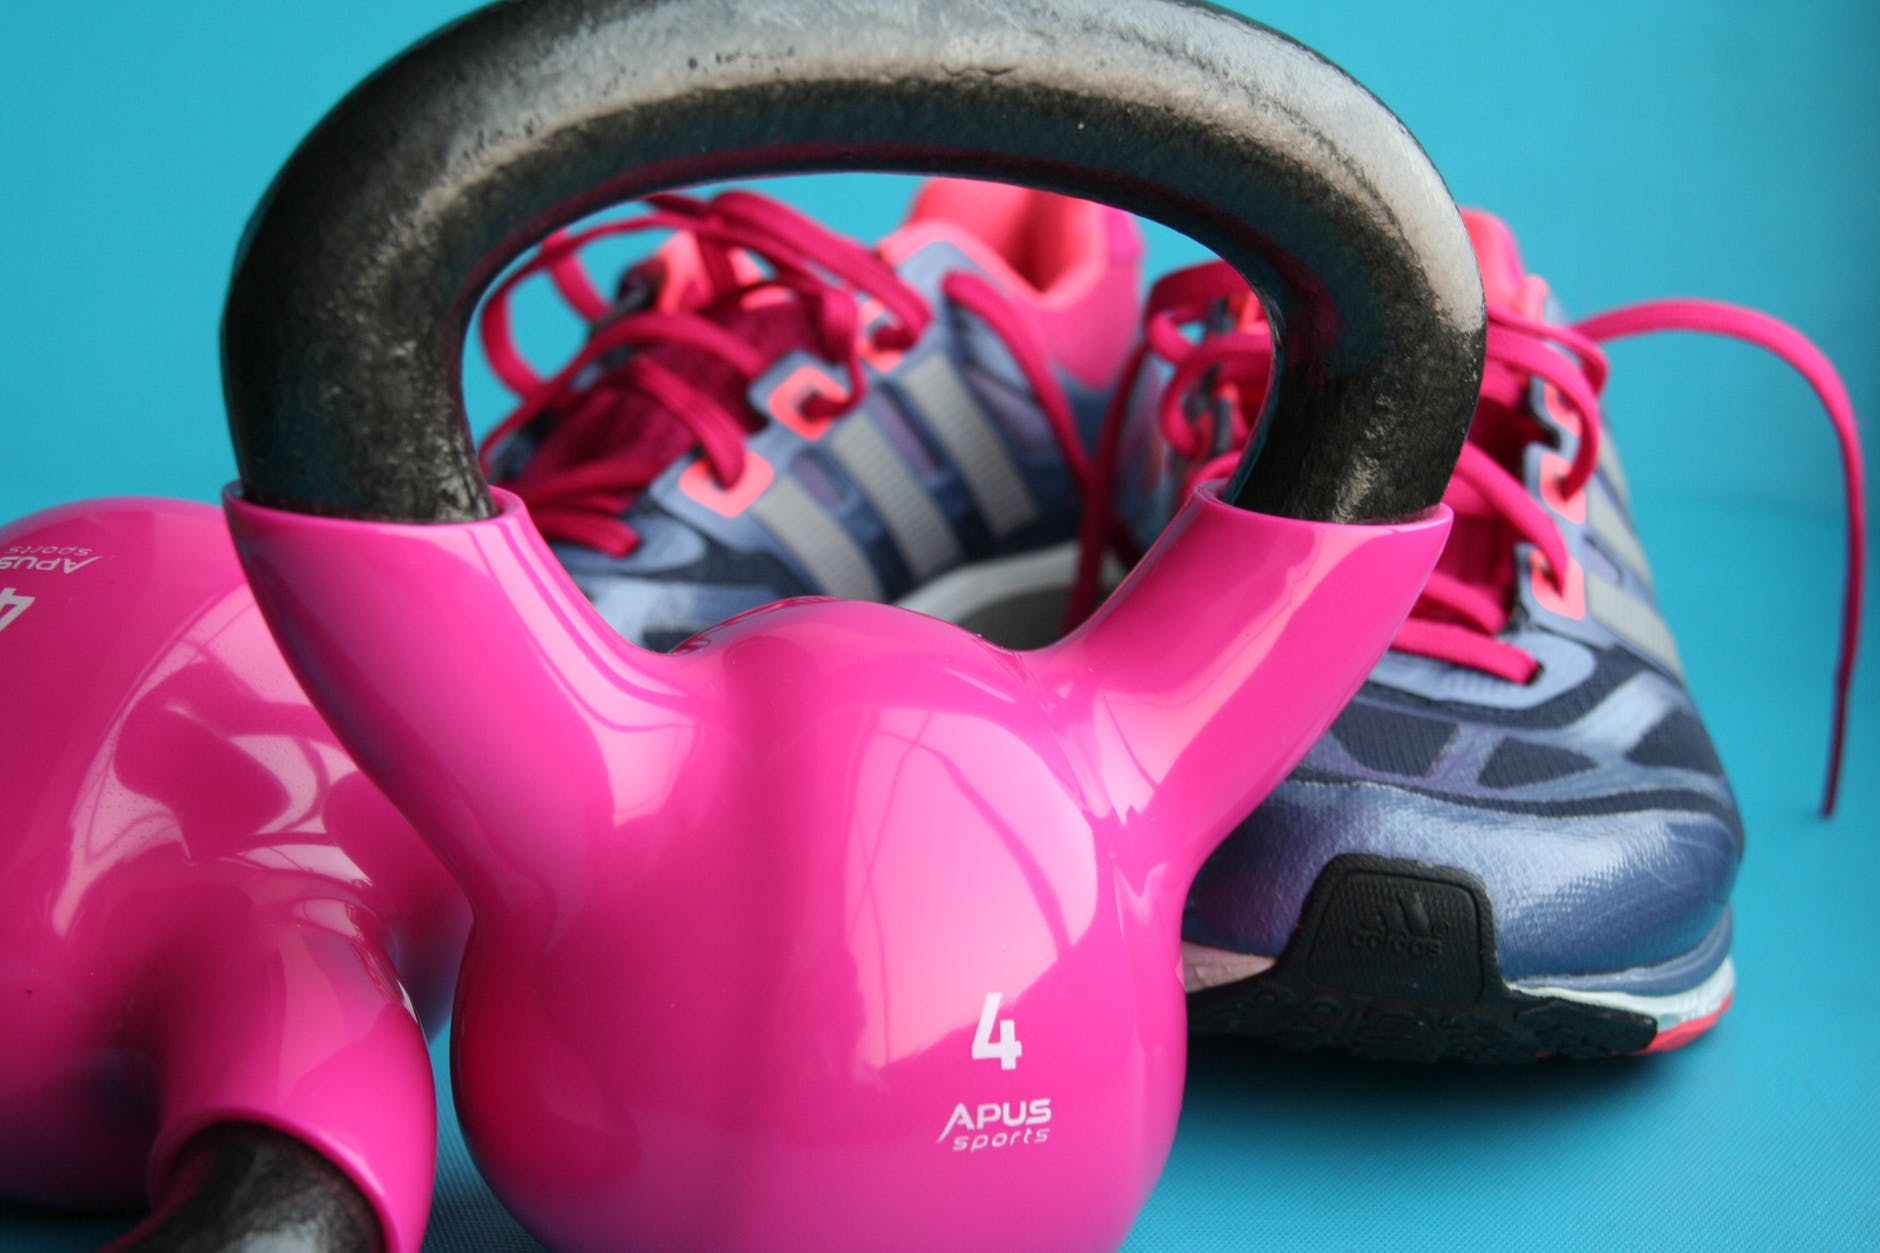 kettle bell beside adidas pair of shoes